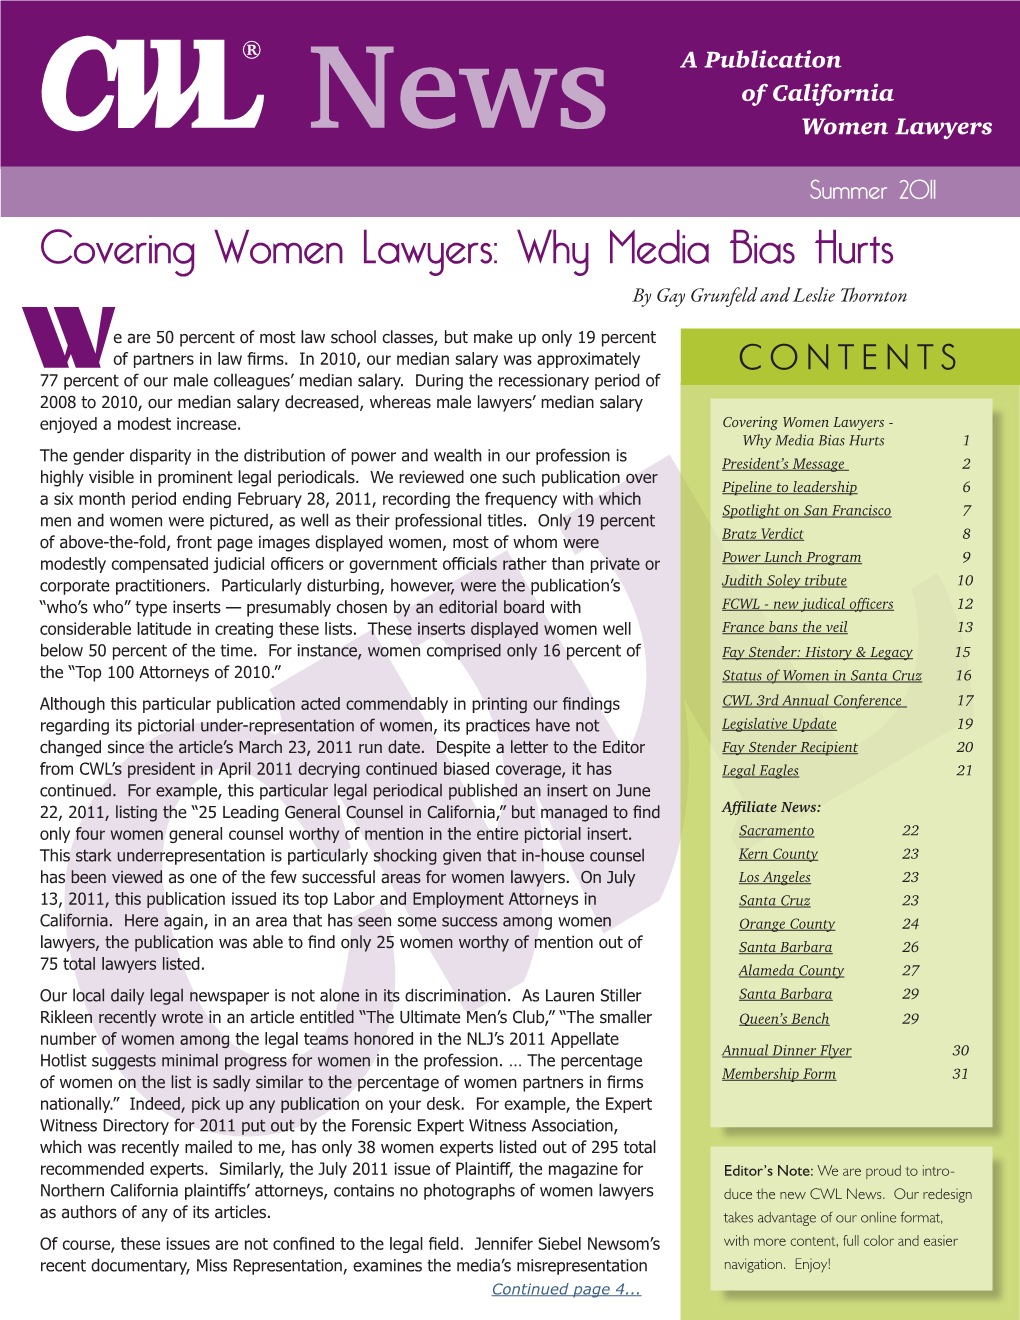 Covering Women Lawyers: Why Media Bias Hurts by Gay Grunfeld and Leslie Thornton